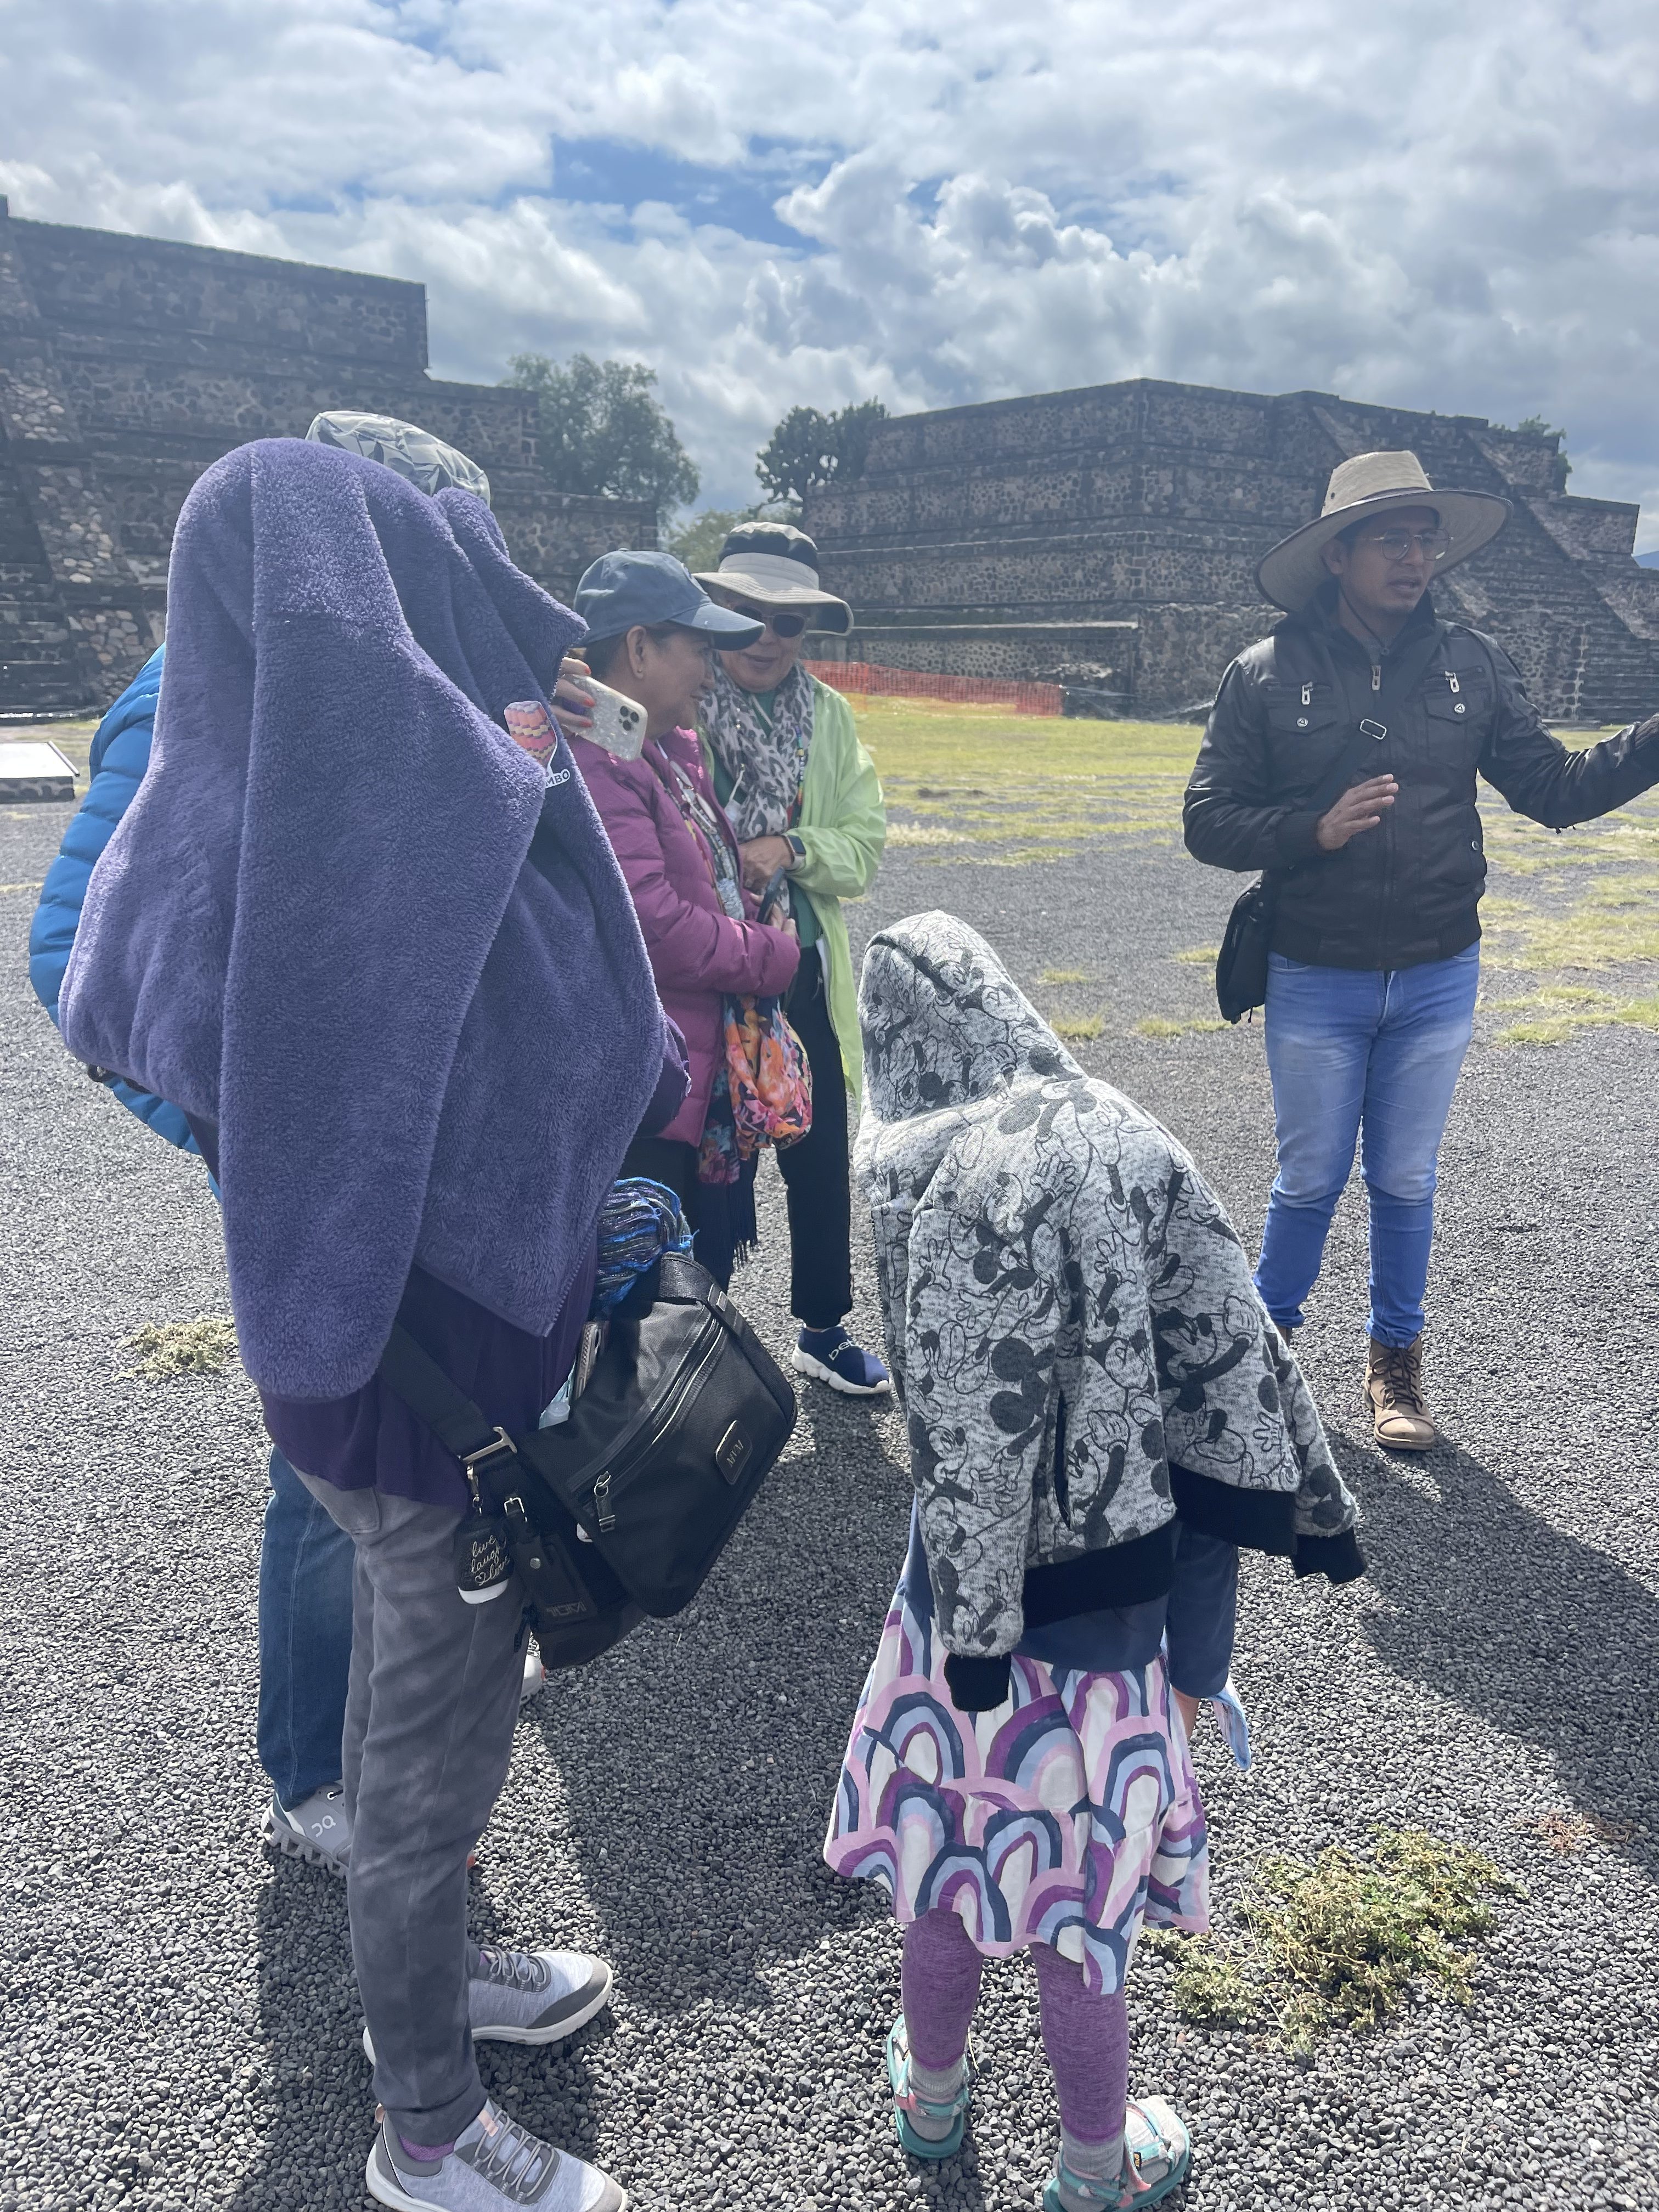 There is no shade in Teotihuacan—be sure to bring your hats and wear lots of sunscreen!